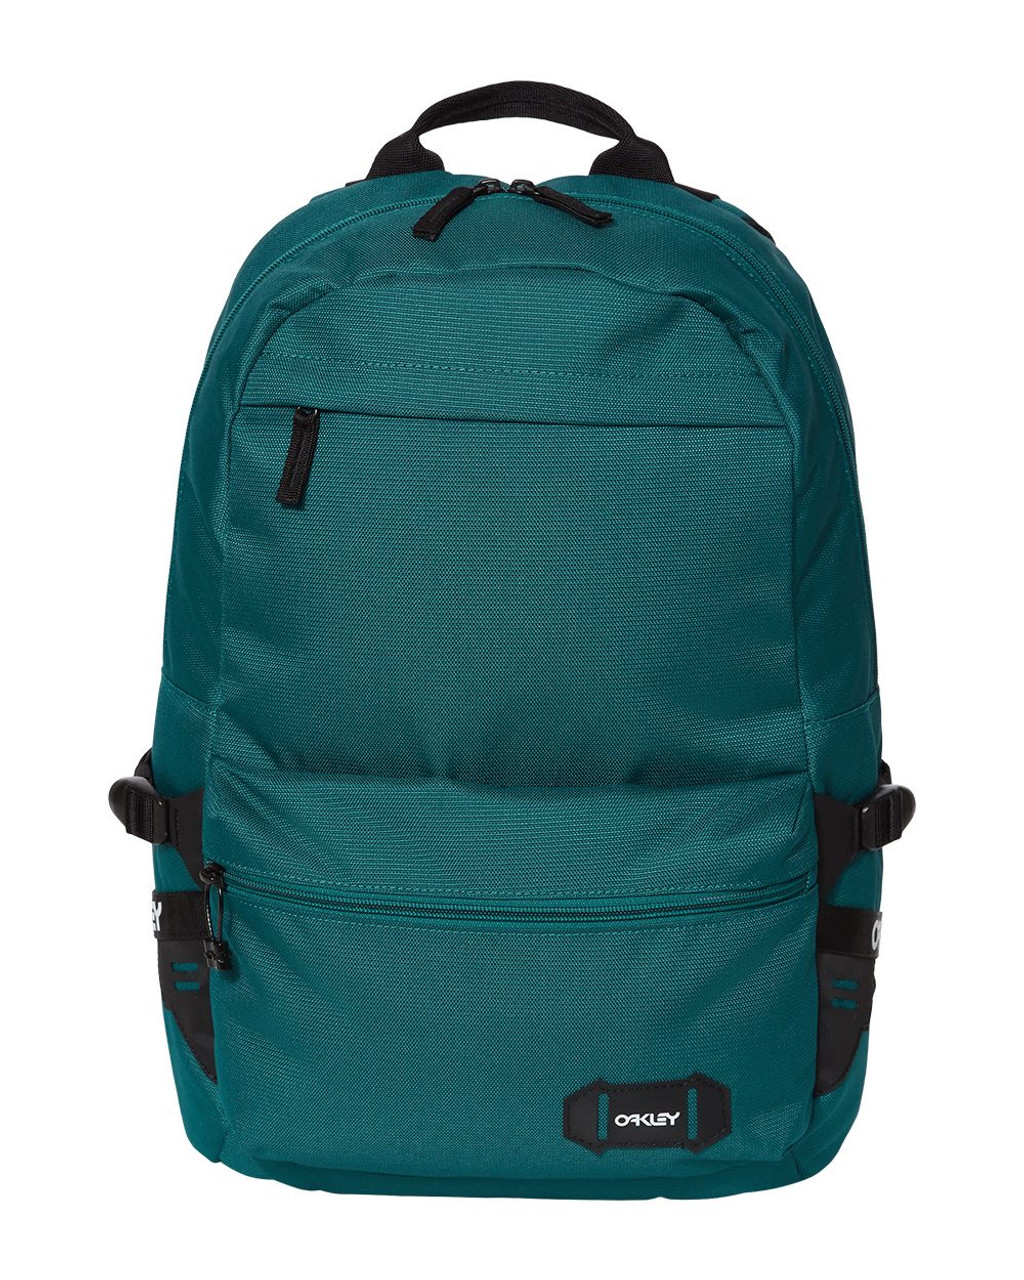 20L Street Backpack - FOS900544